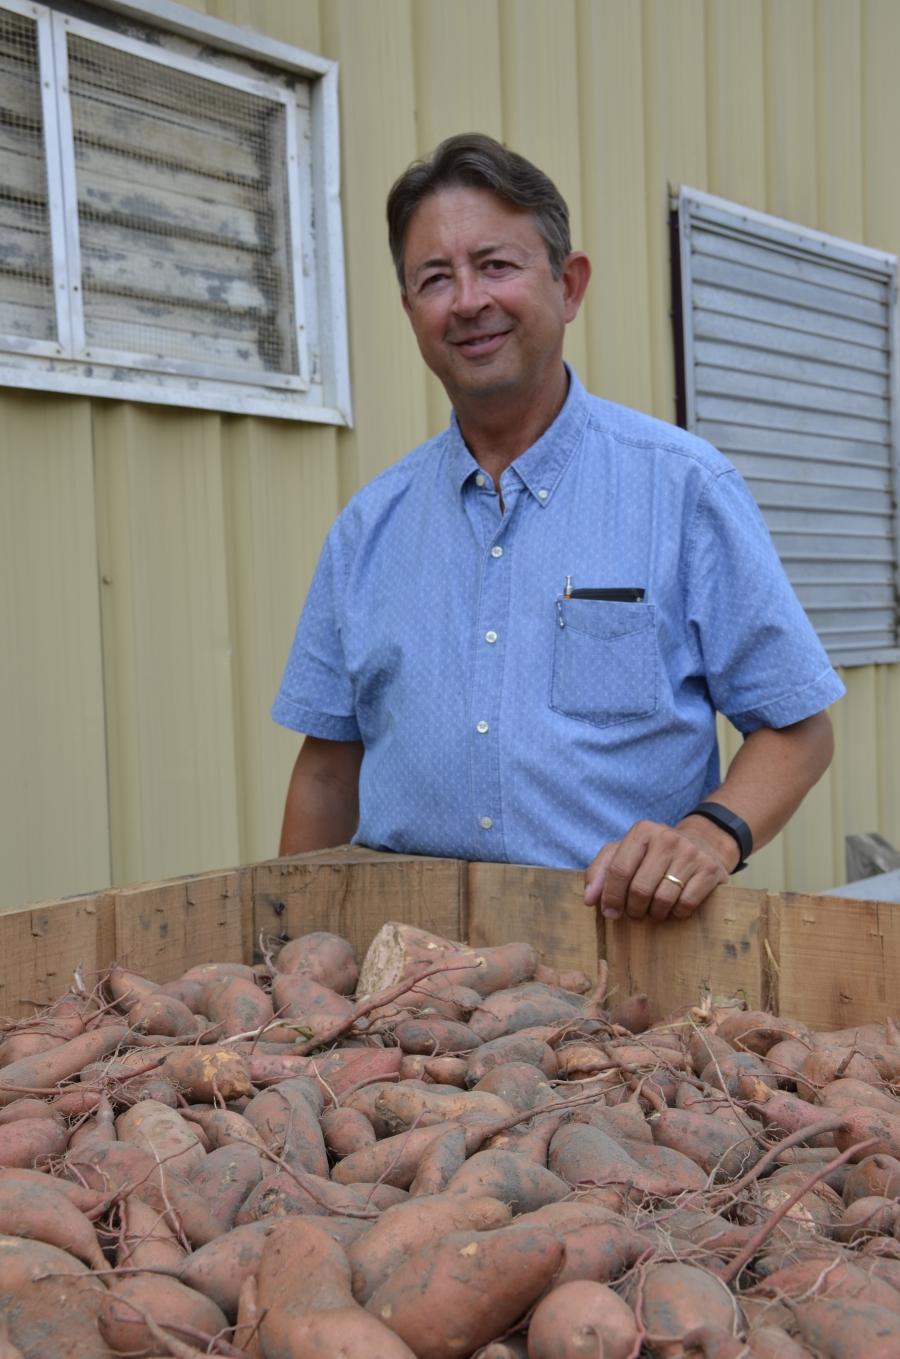 Johnny Barnes runs the largest sweet potato farm in the United States.